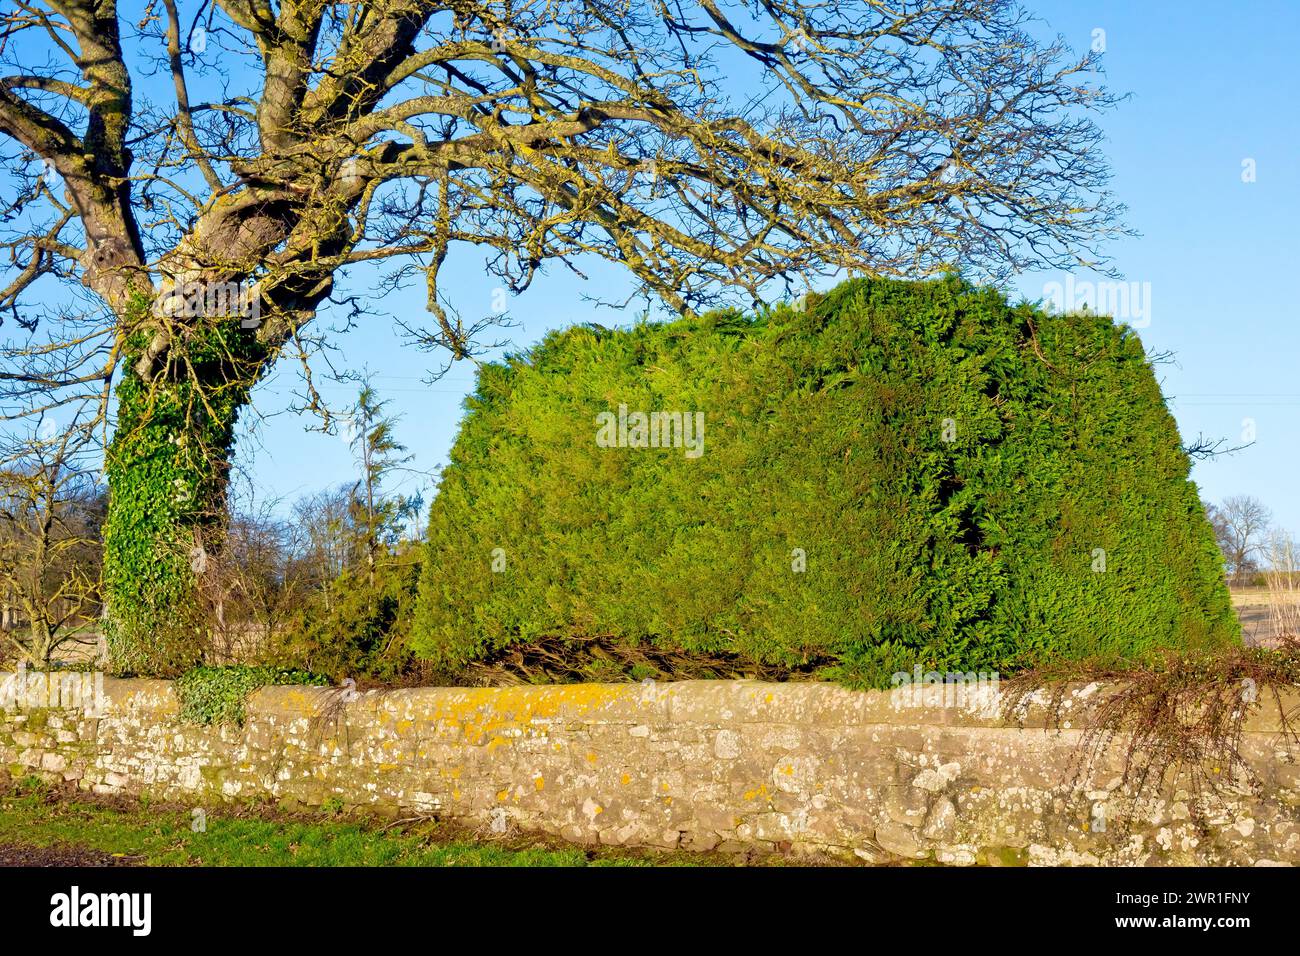 Close up of an isolated block of Leyland Cypress or Leylandii (cupressocyparis leylandii) hedge or hedging, neatly trimmed and maintained. Stock Photo